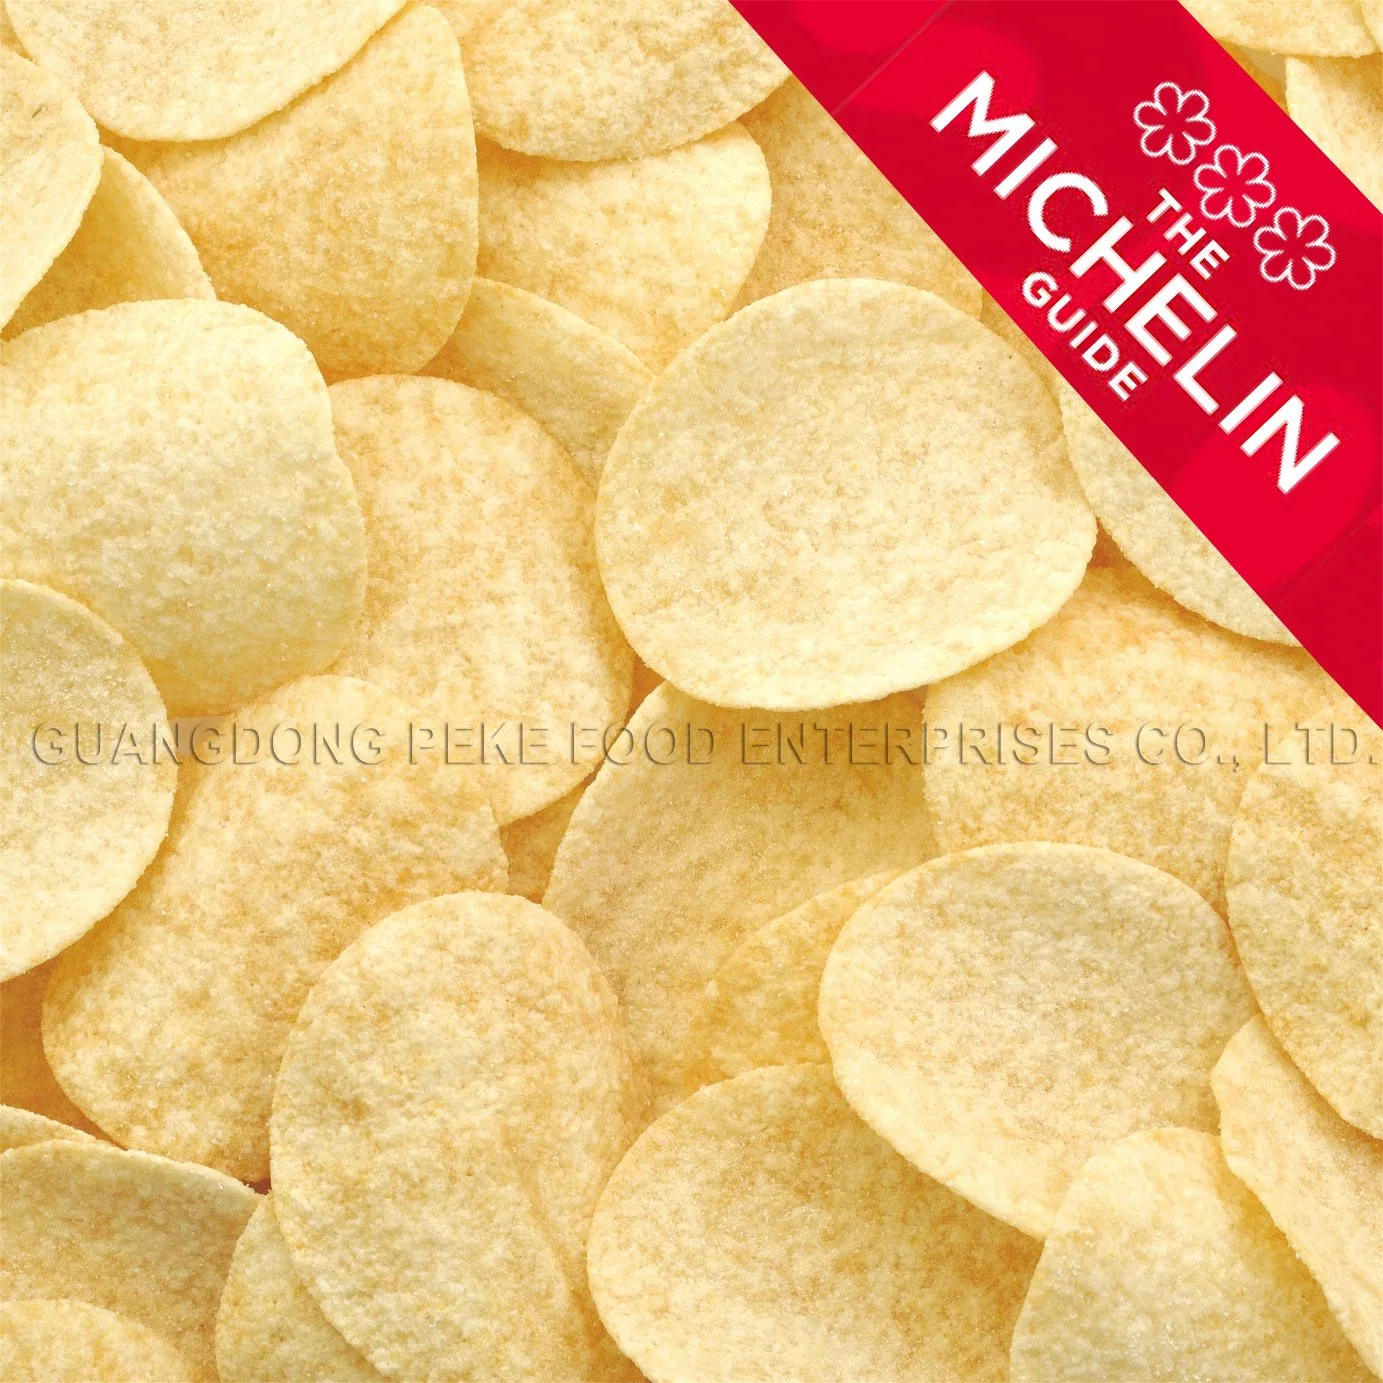 160g/130g/100g/40g Stackable Potato Chips & Crisps Puffed Food Snack with Halal